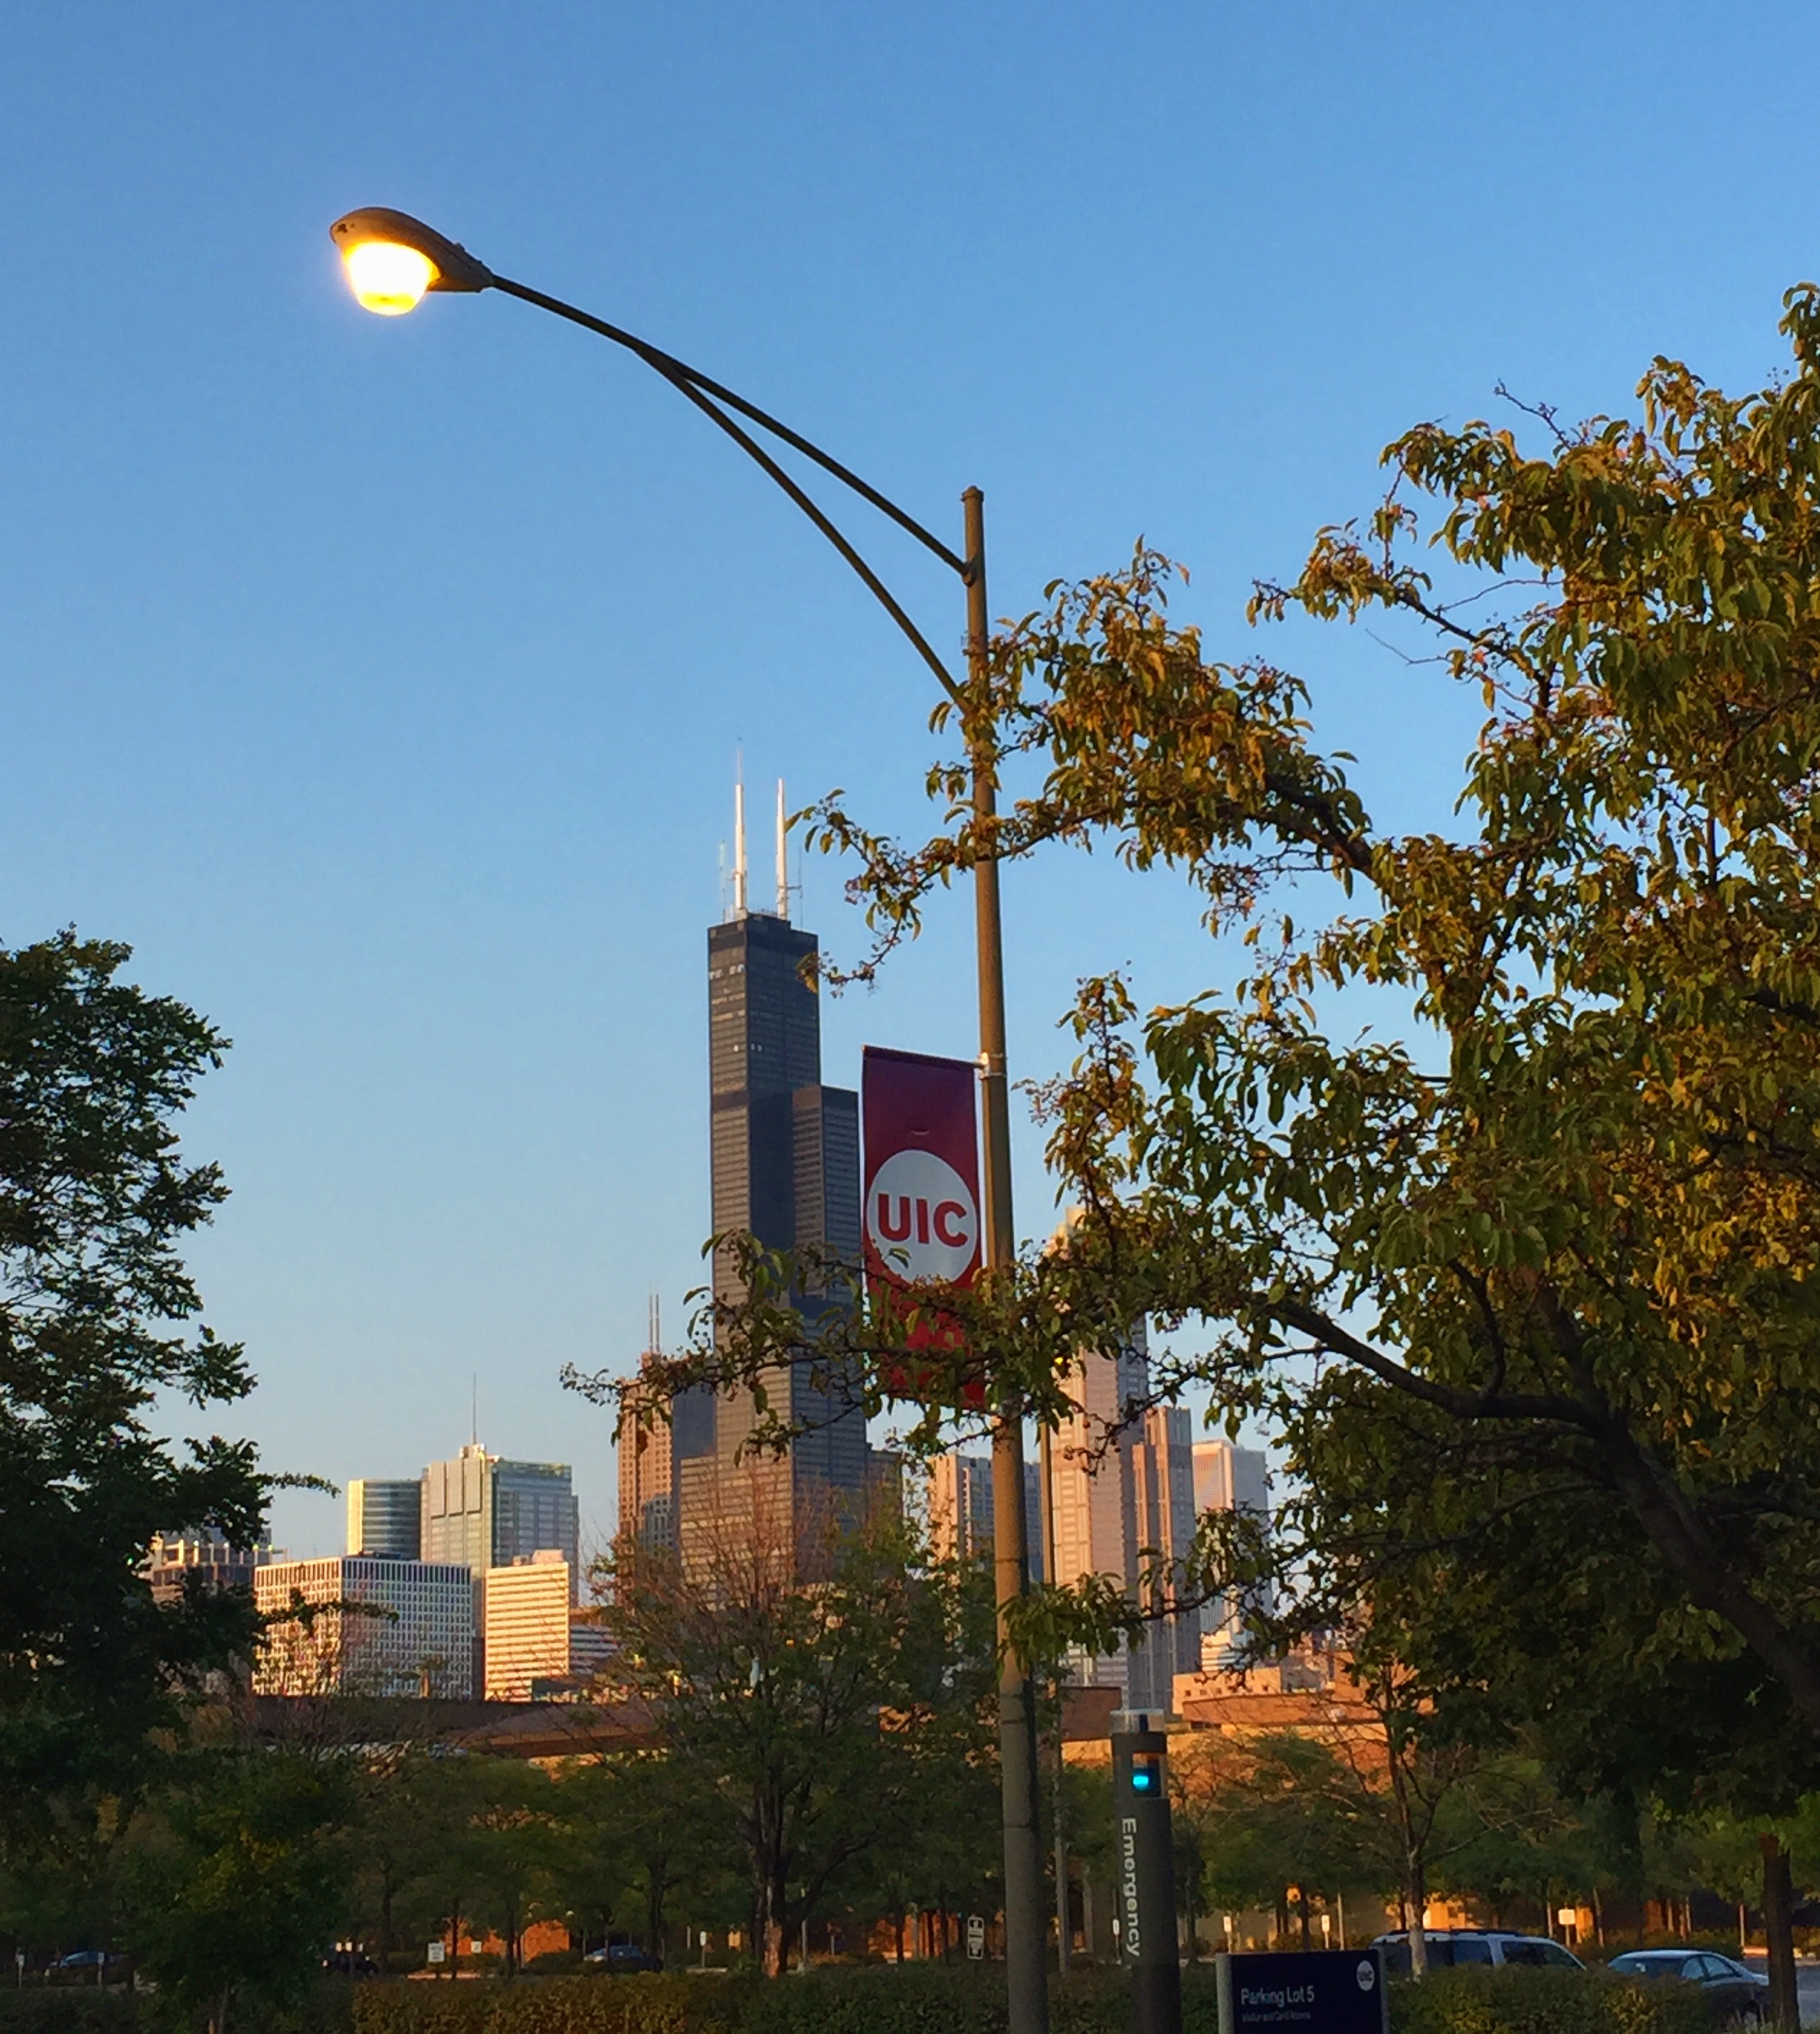 The Chicago Flâneur – Observing and Analyzing the Urban